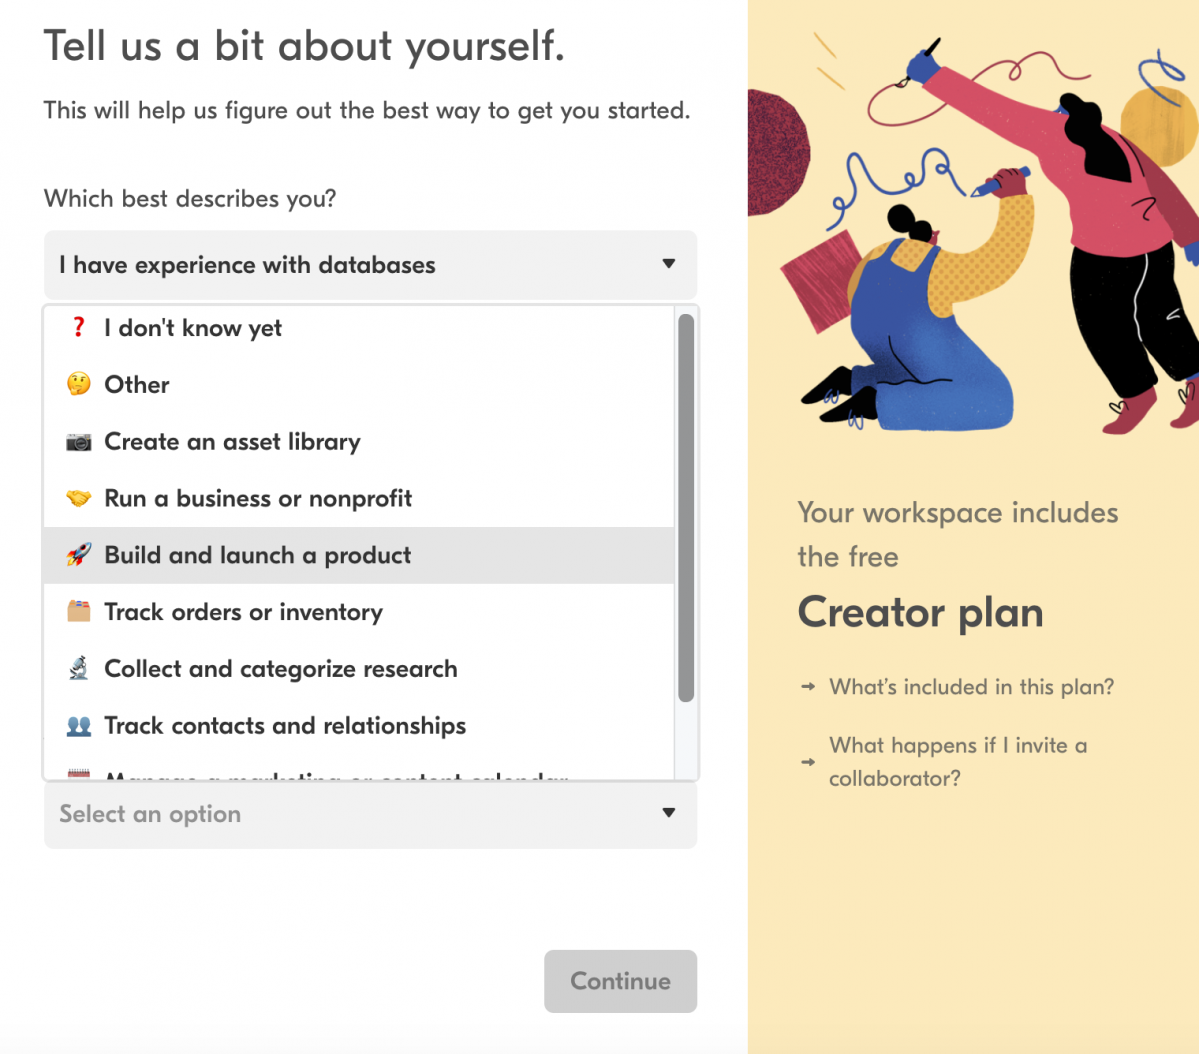 Airtable onboarding image: tell us a bit about yourself